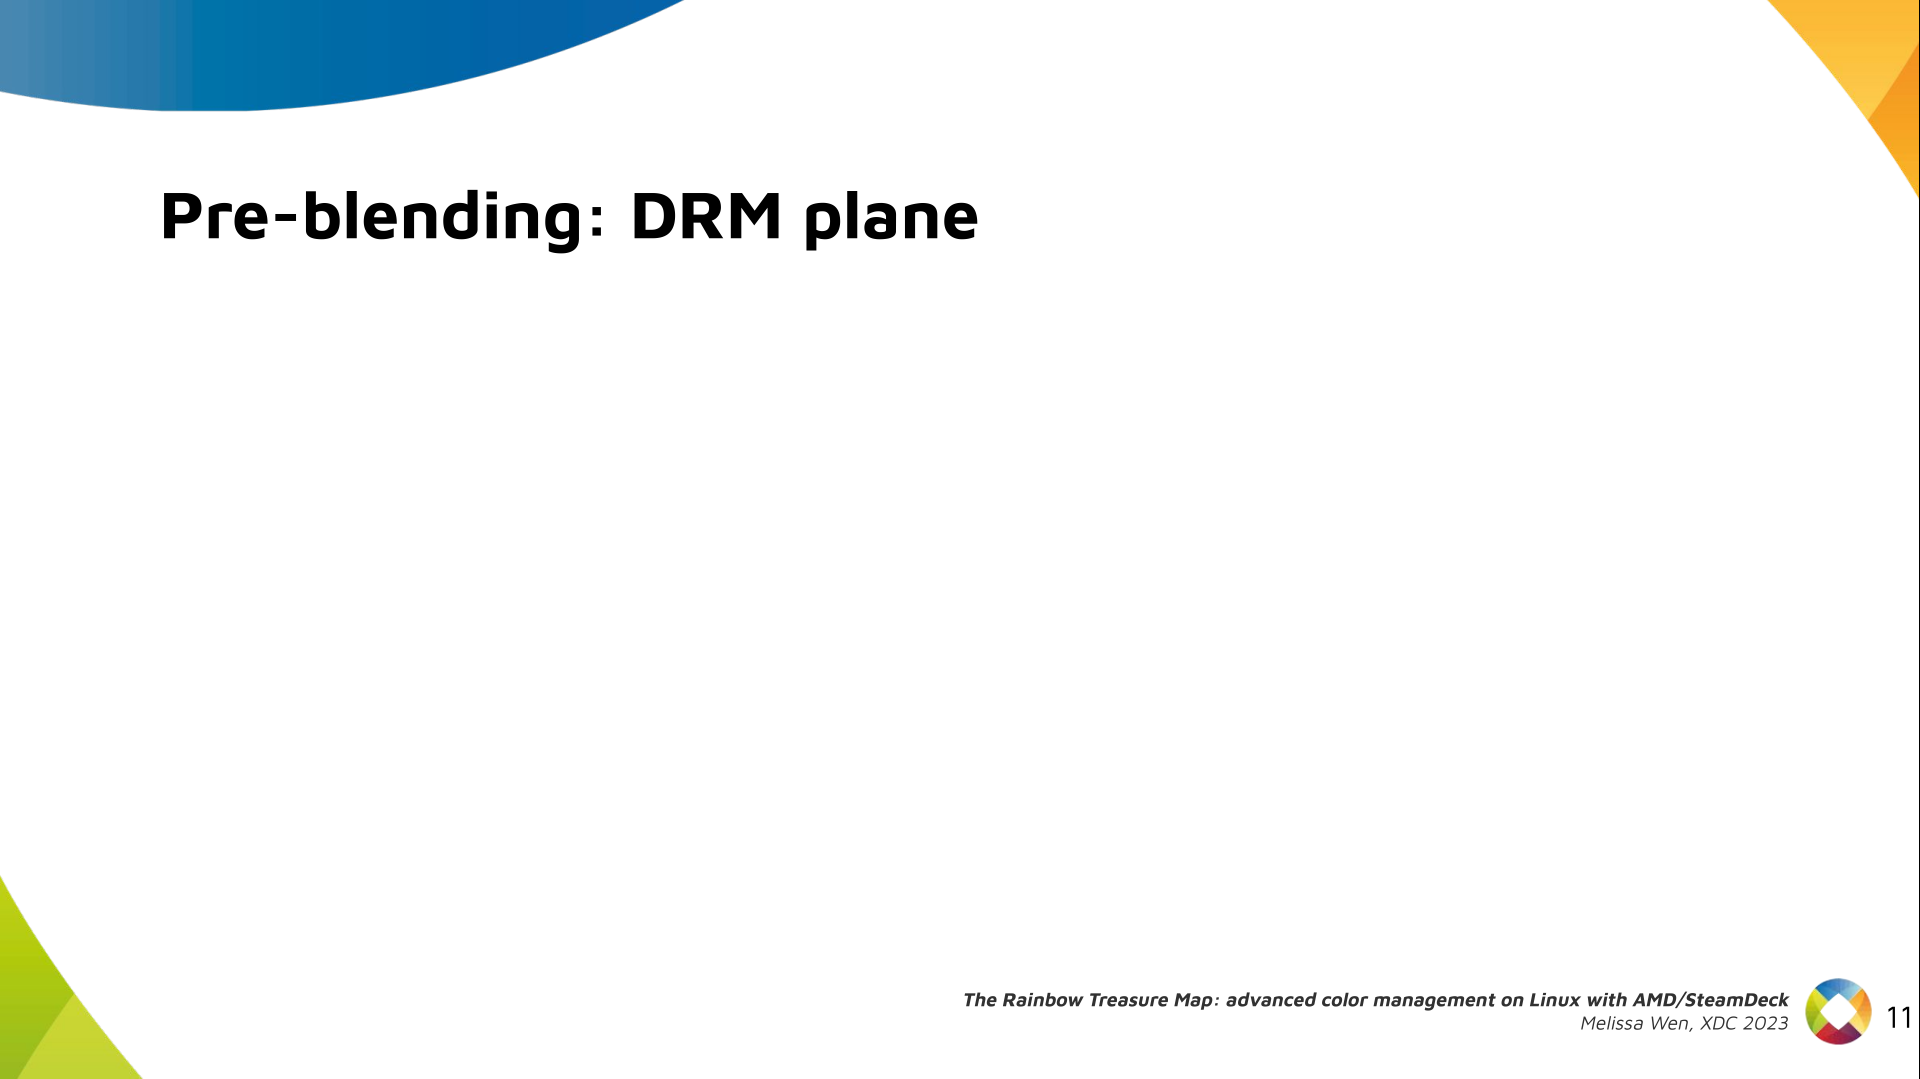 Slide 11: Blank slide with no content only a title 'Pre-blending: DRM plane'